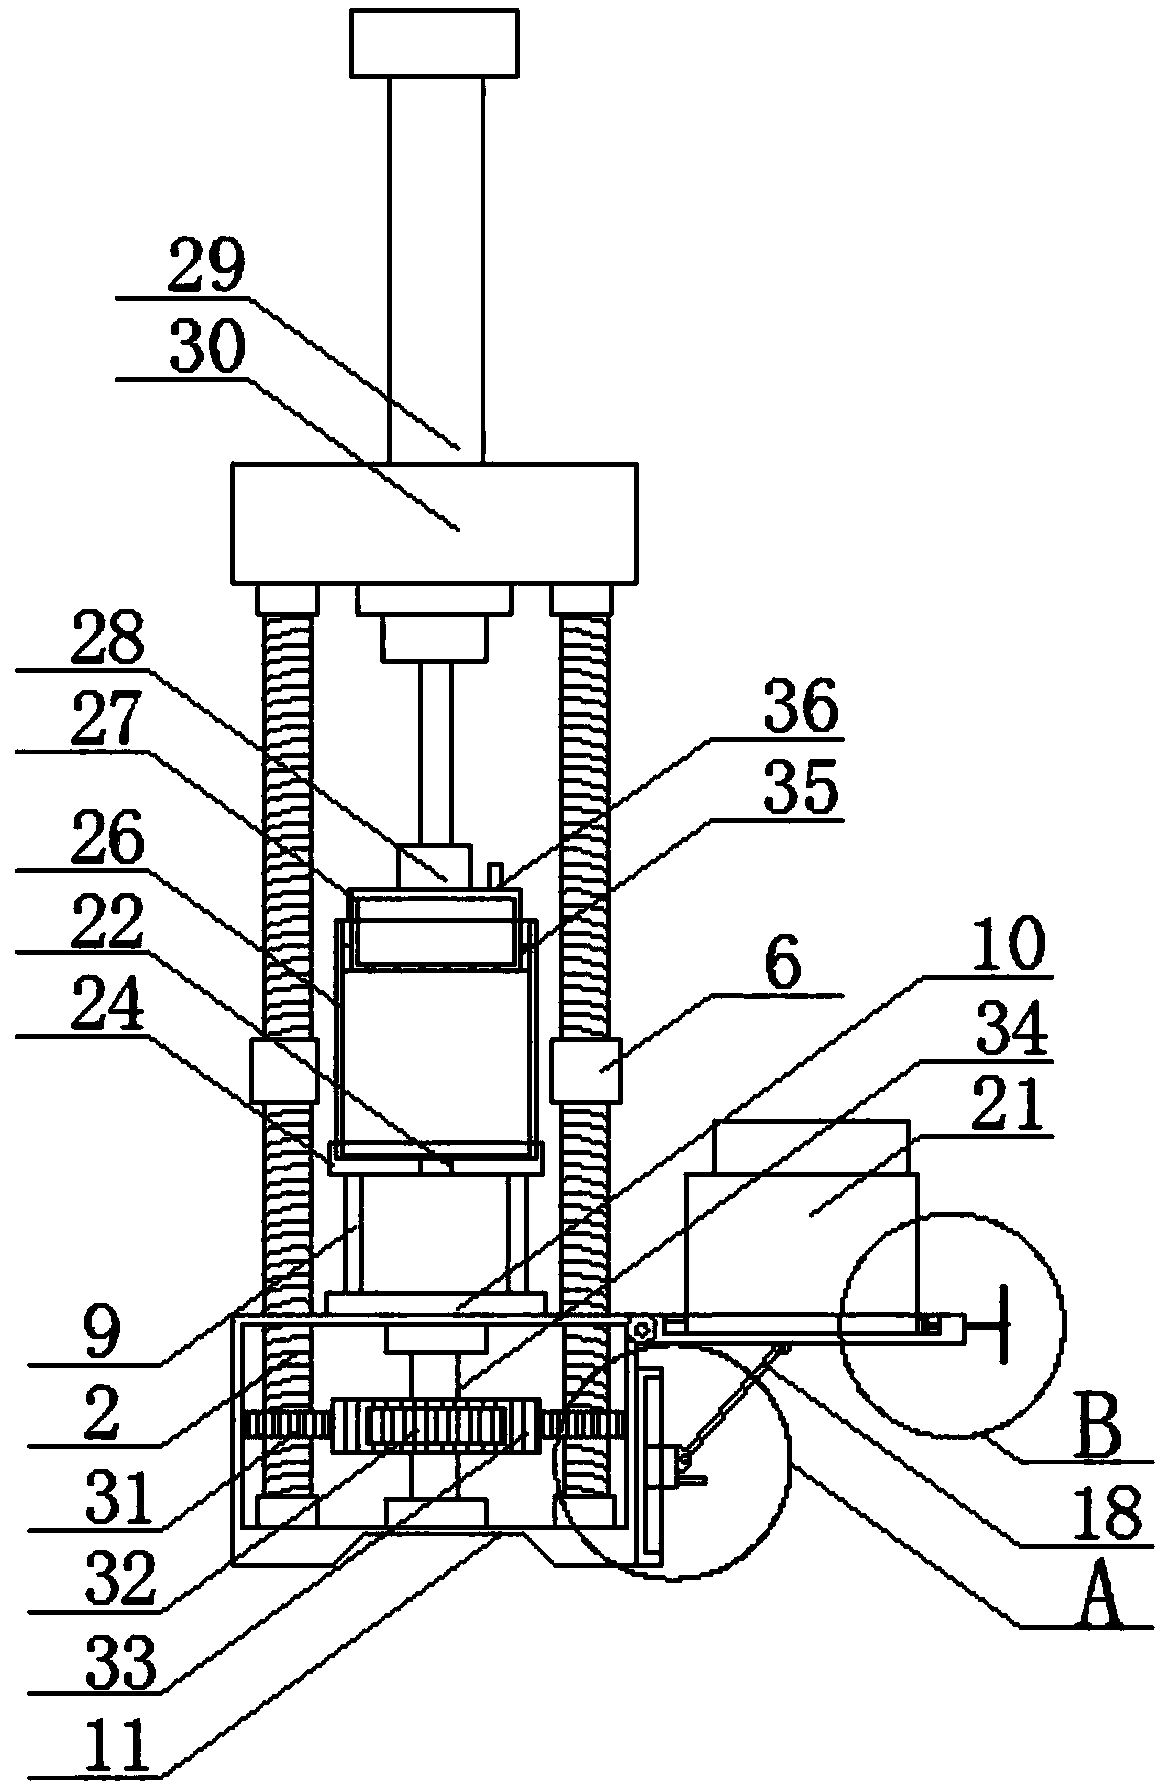 Water and sand surge test system and monitoring method